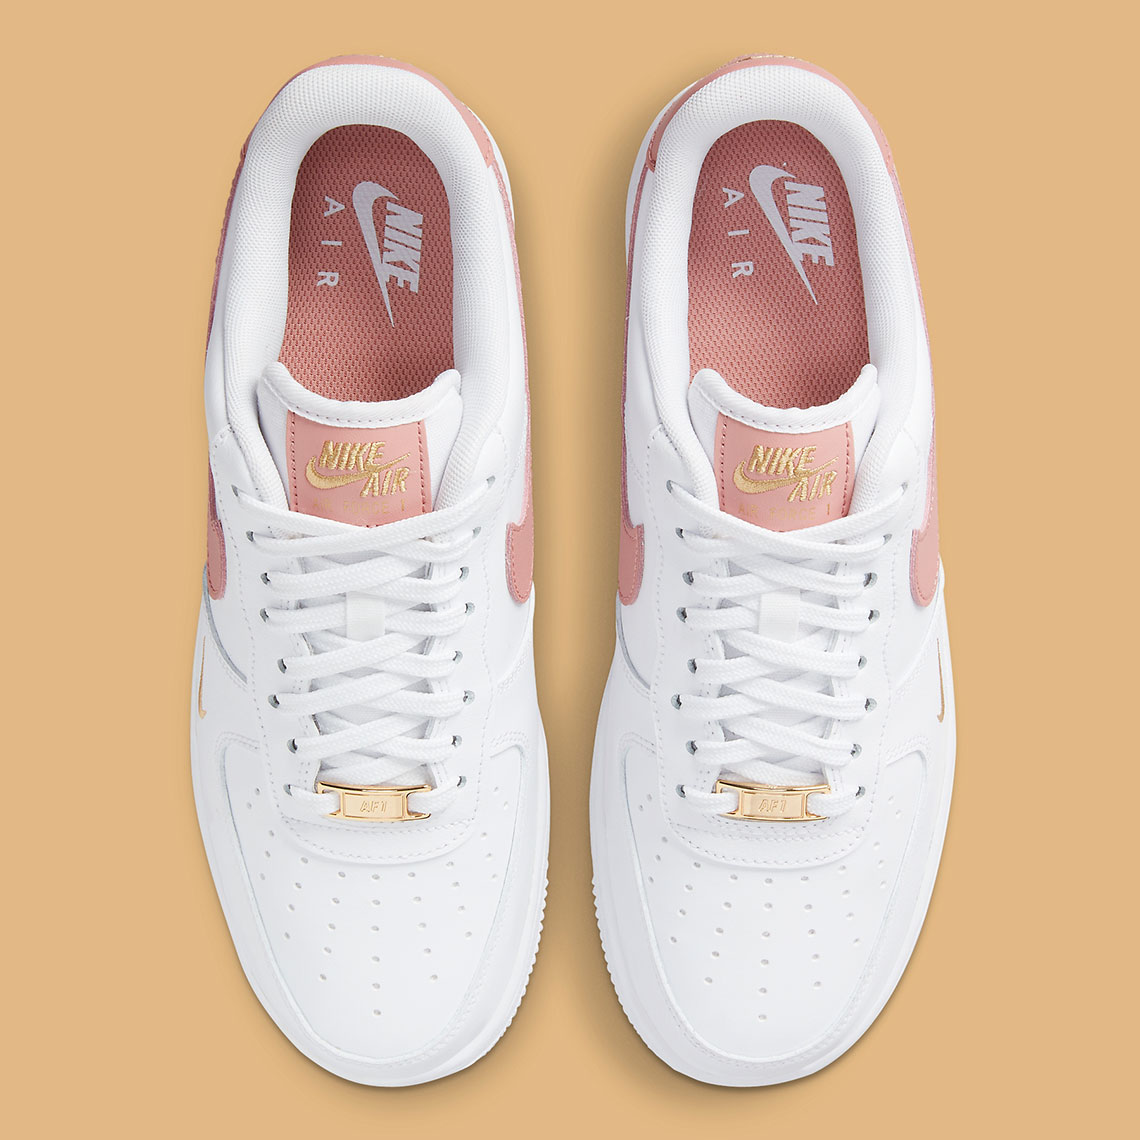 Air Force 1 Low White/Rust Pink CZ0270-103 SneakerNews.com